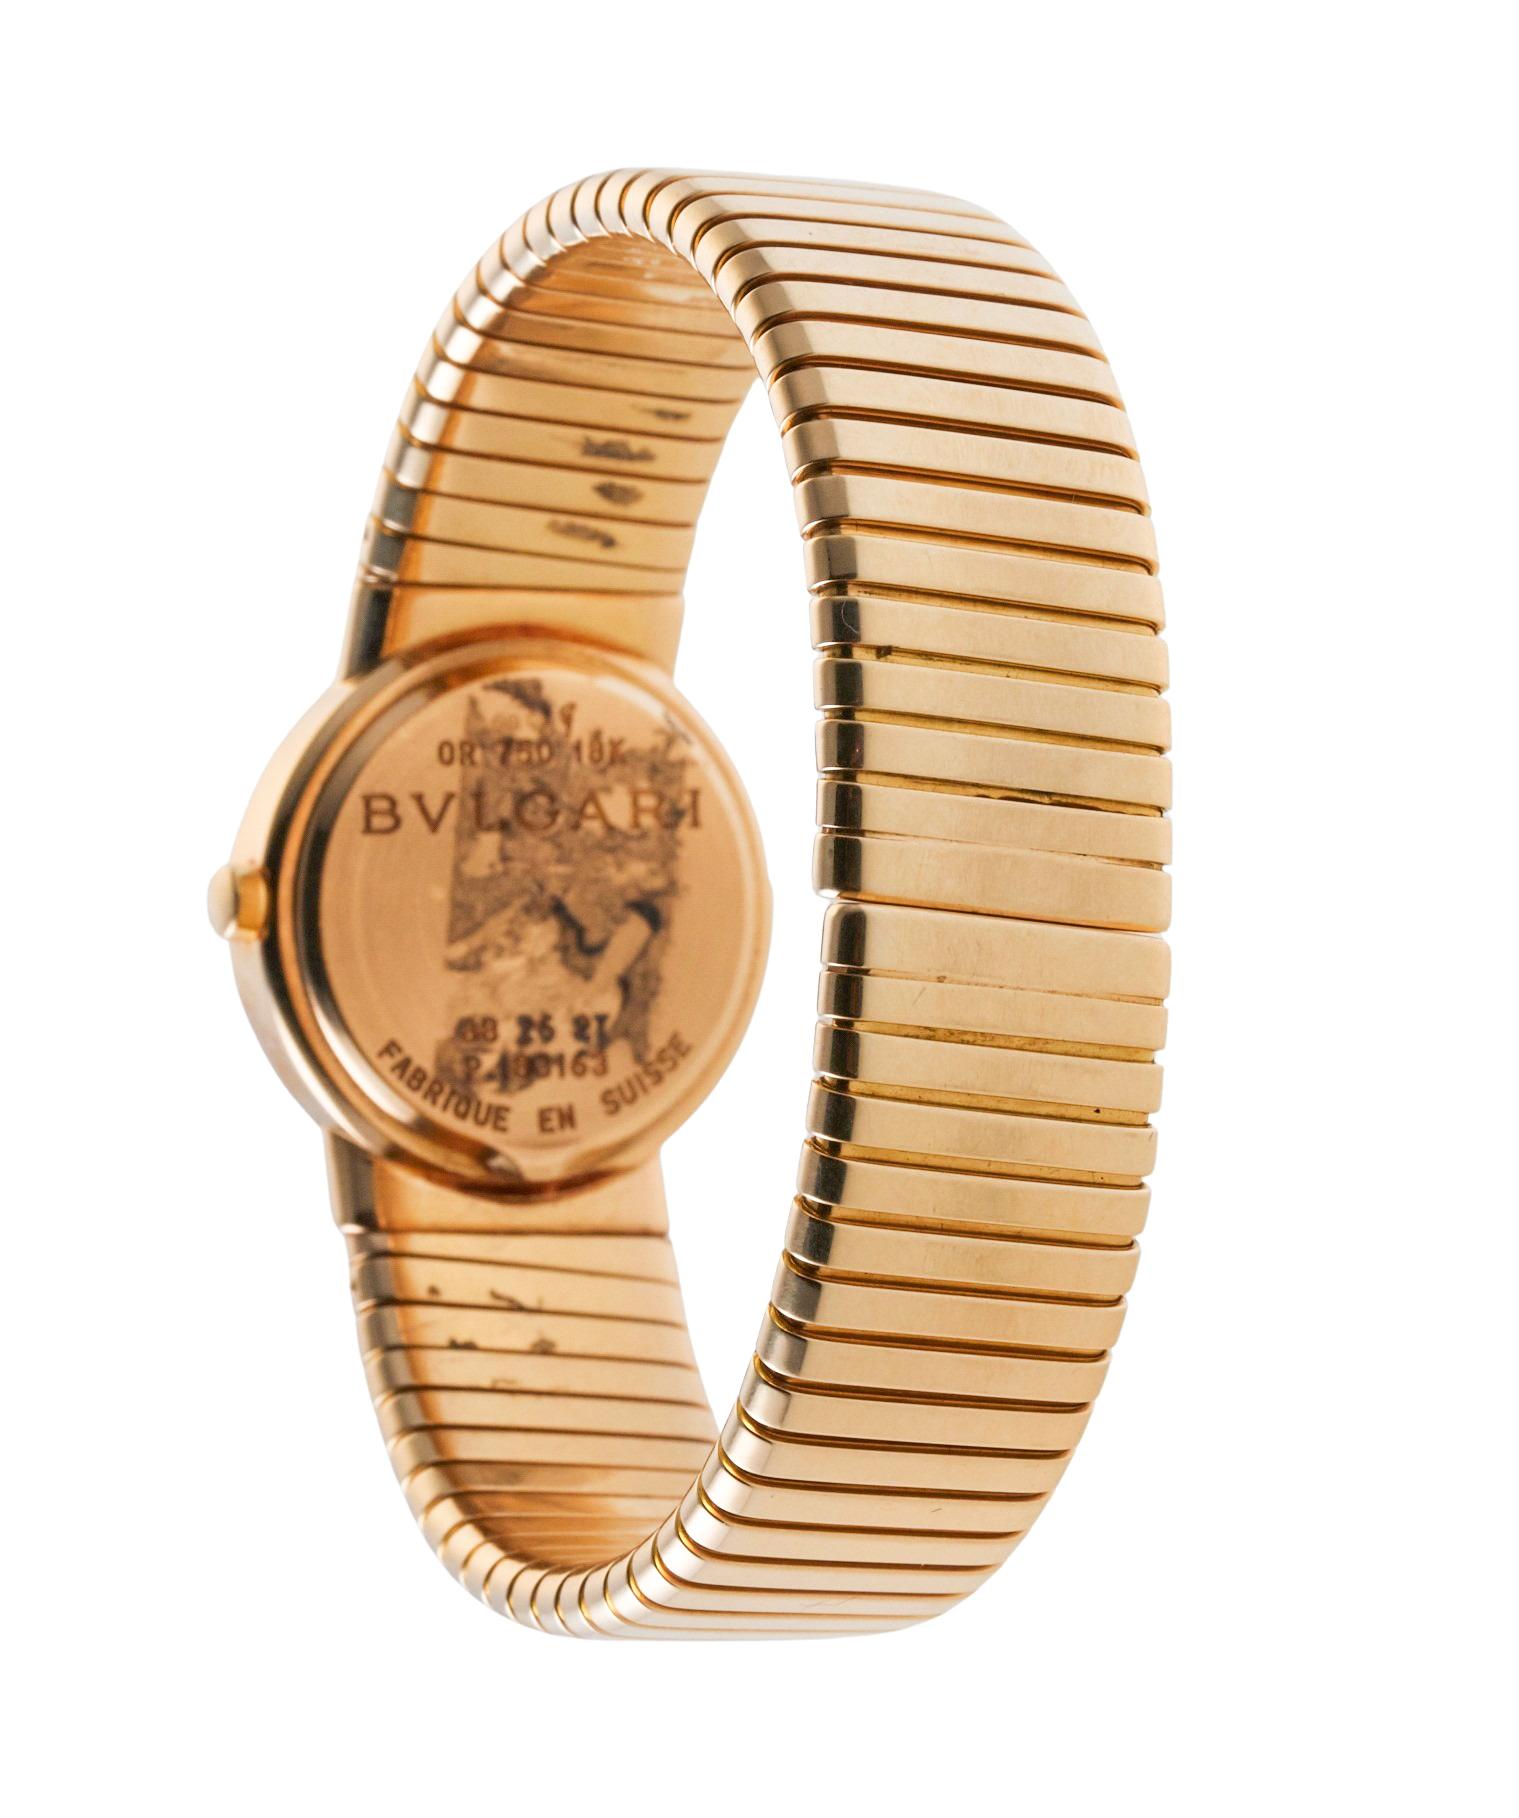 Bulgari Tubogas Gold Watch Bracelet BB 26 2T In Excellent Condition For Sale In New York, NY